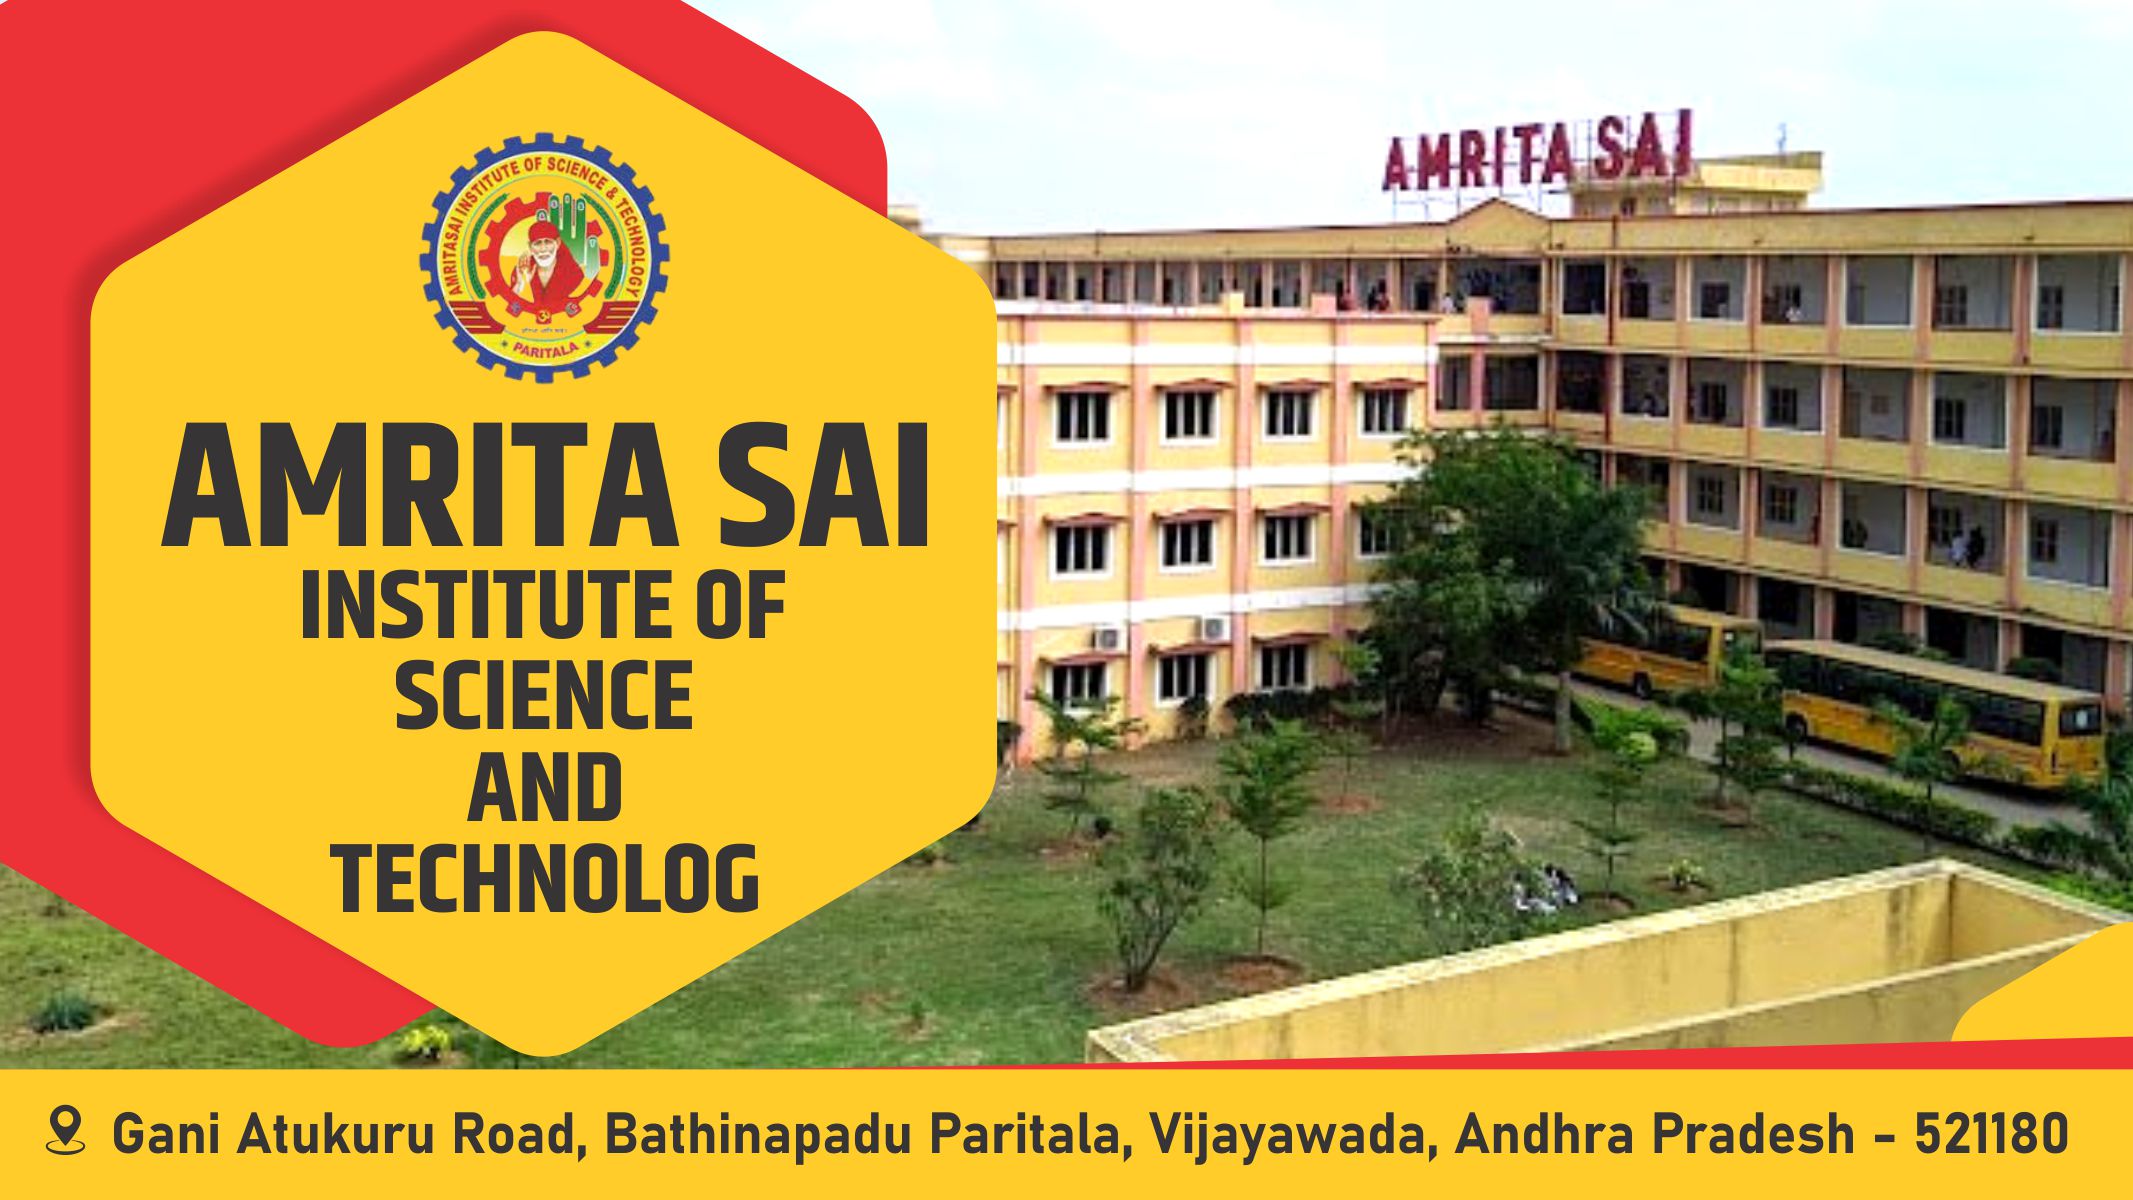 Out Side View of Amrita Sai Institute Of Science And Technology